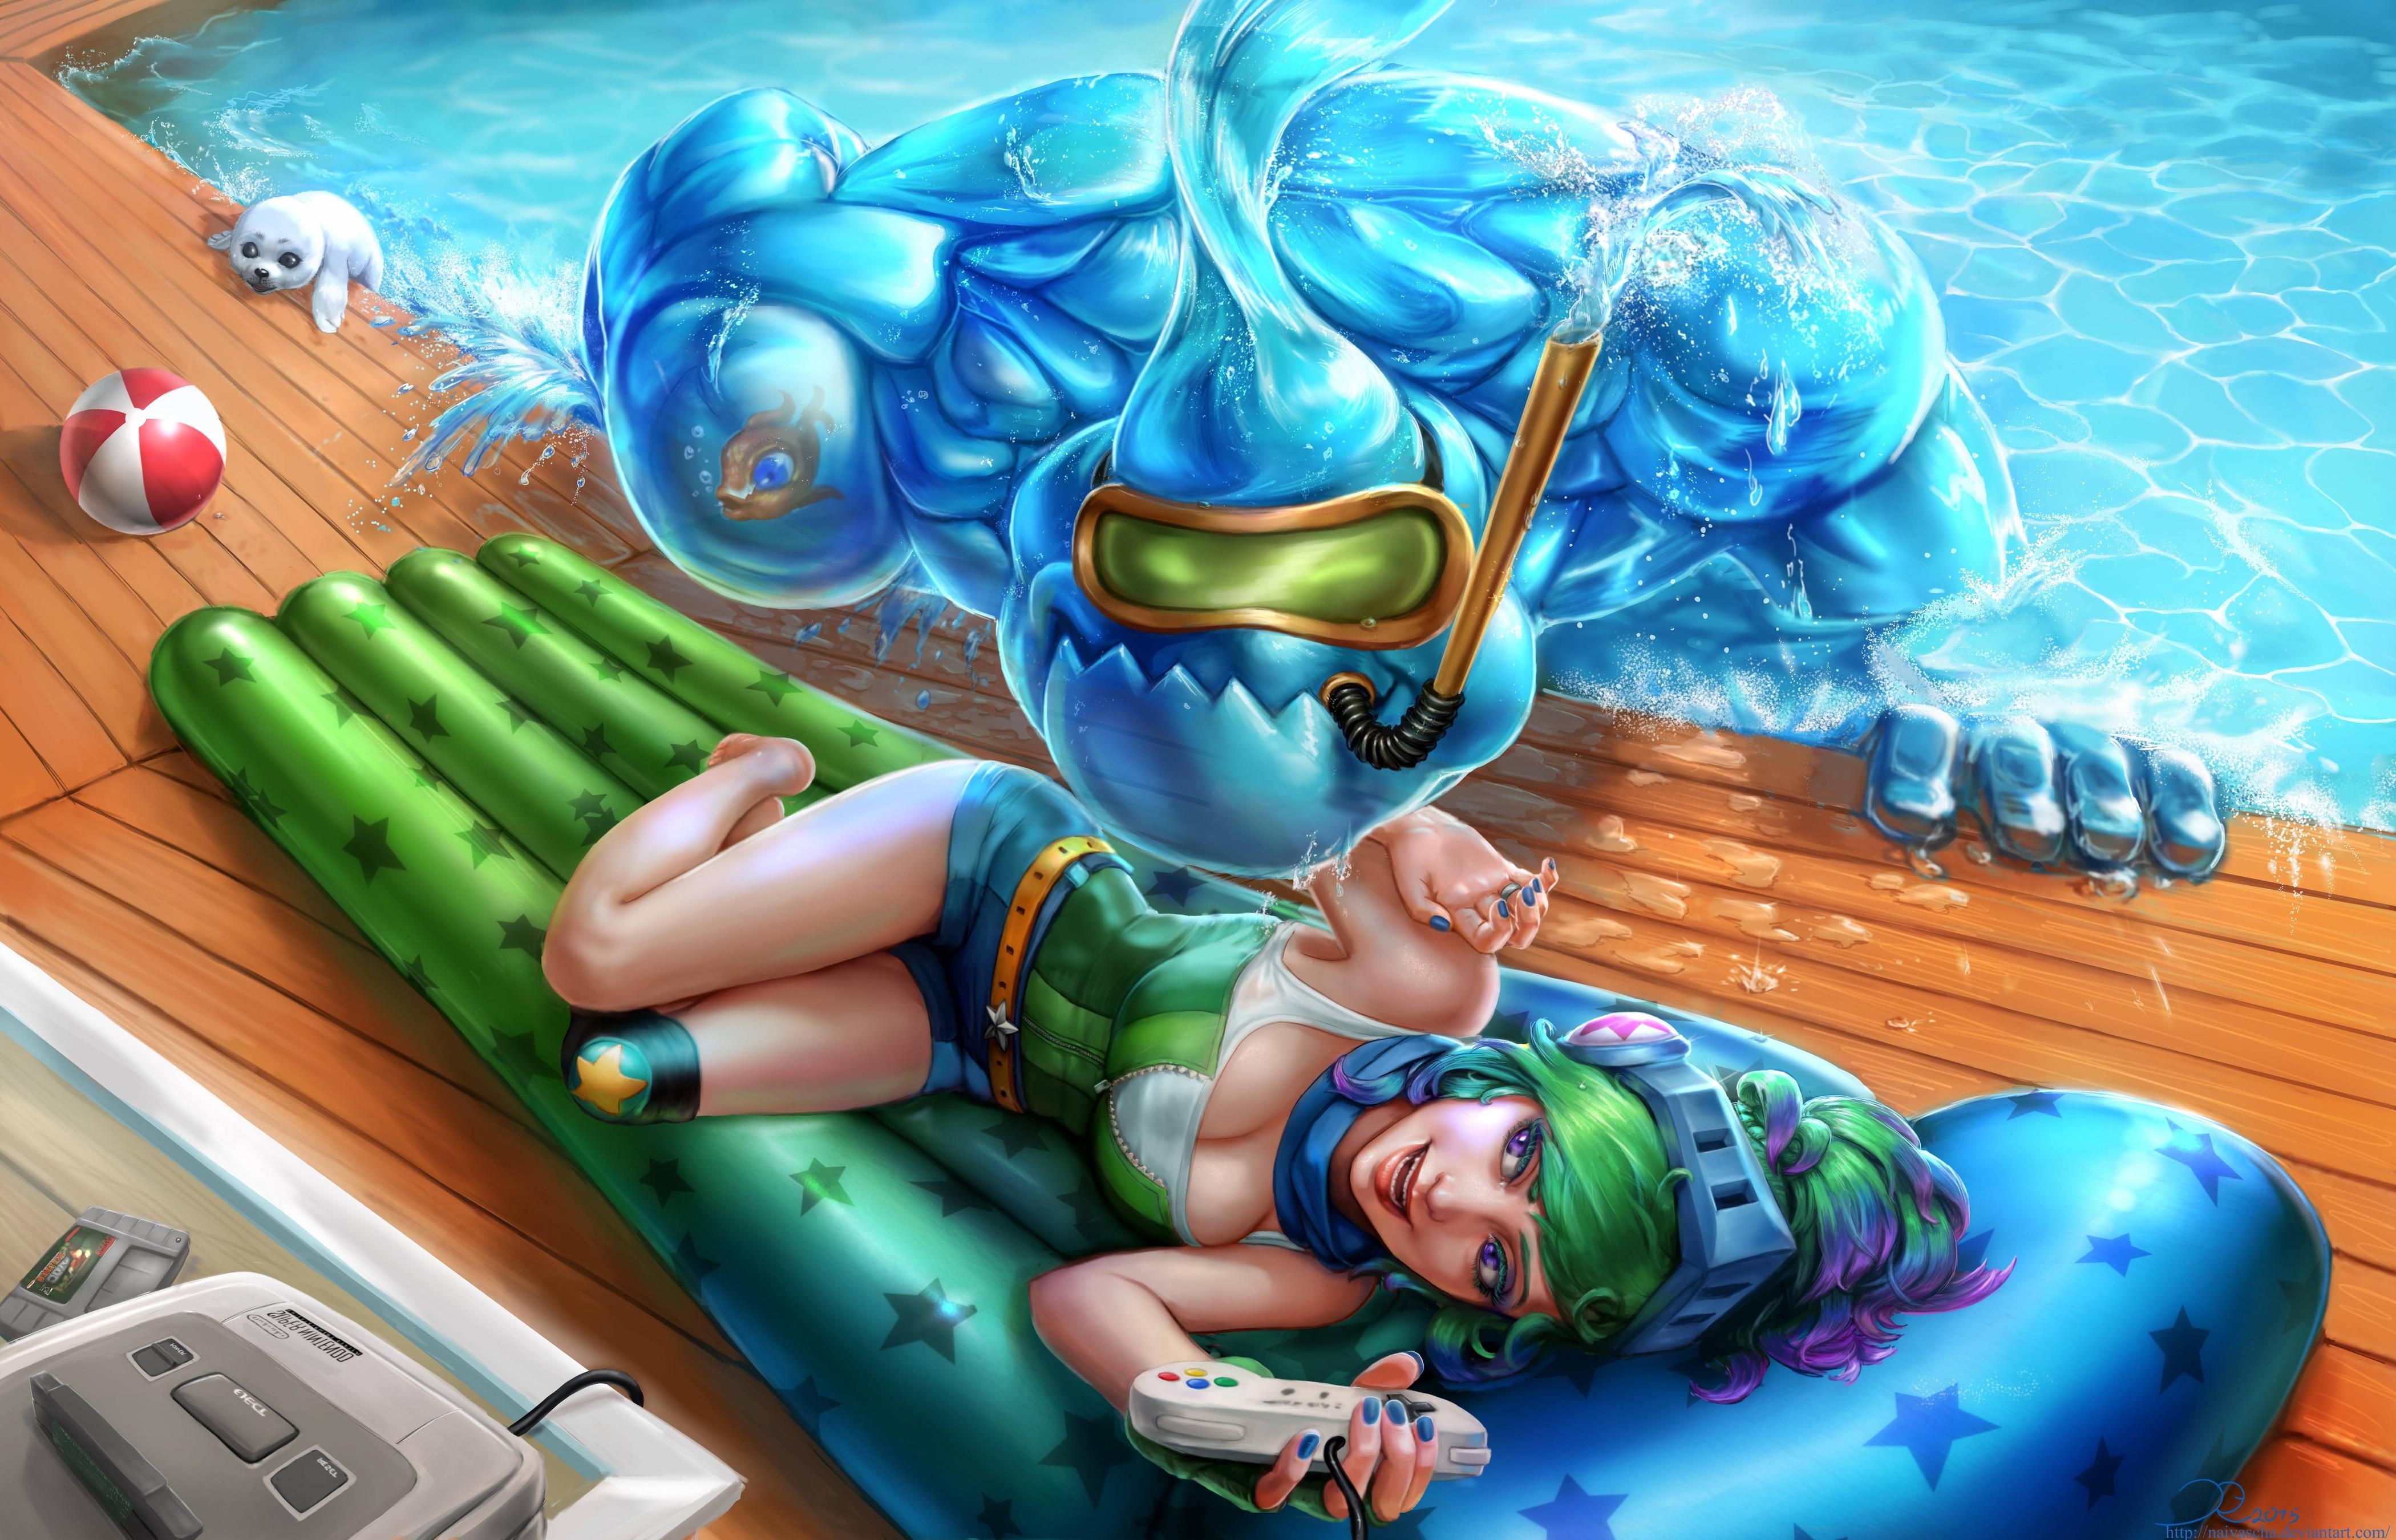 People 4200x2700 Zac (League of Legends) Riven (League of Legends) League of Legends boobs women green hair Nintendo seals fish water headphones ball scarf legs controllers cyan video game girls video game characters PC gaming painted nails blue nails Super Famicom legs together lying down smiling pants air mattress DeviantArt fan art